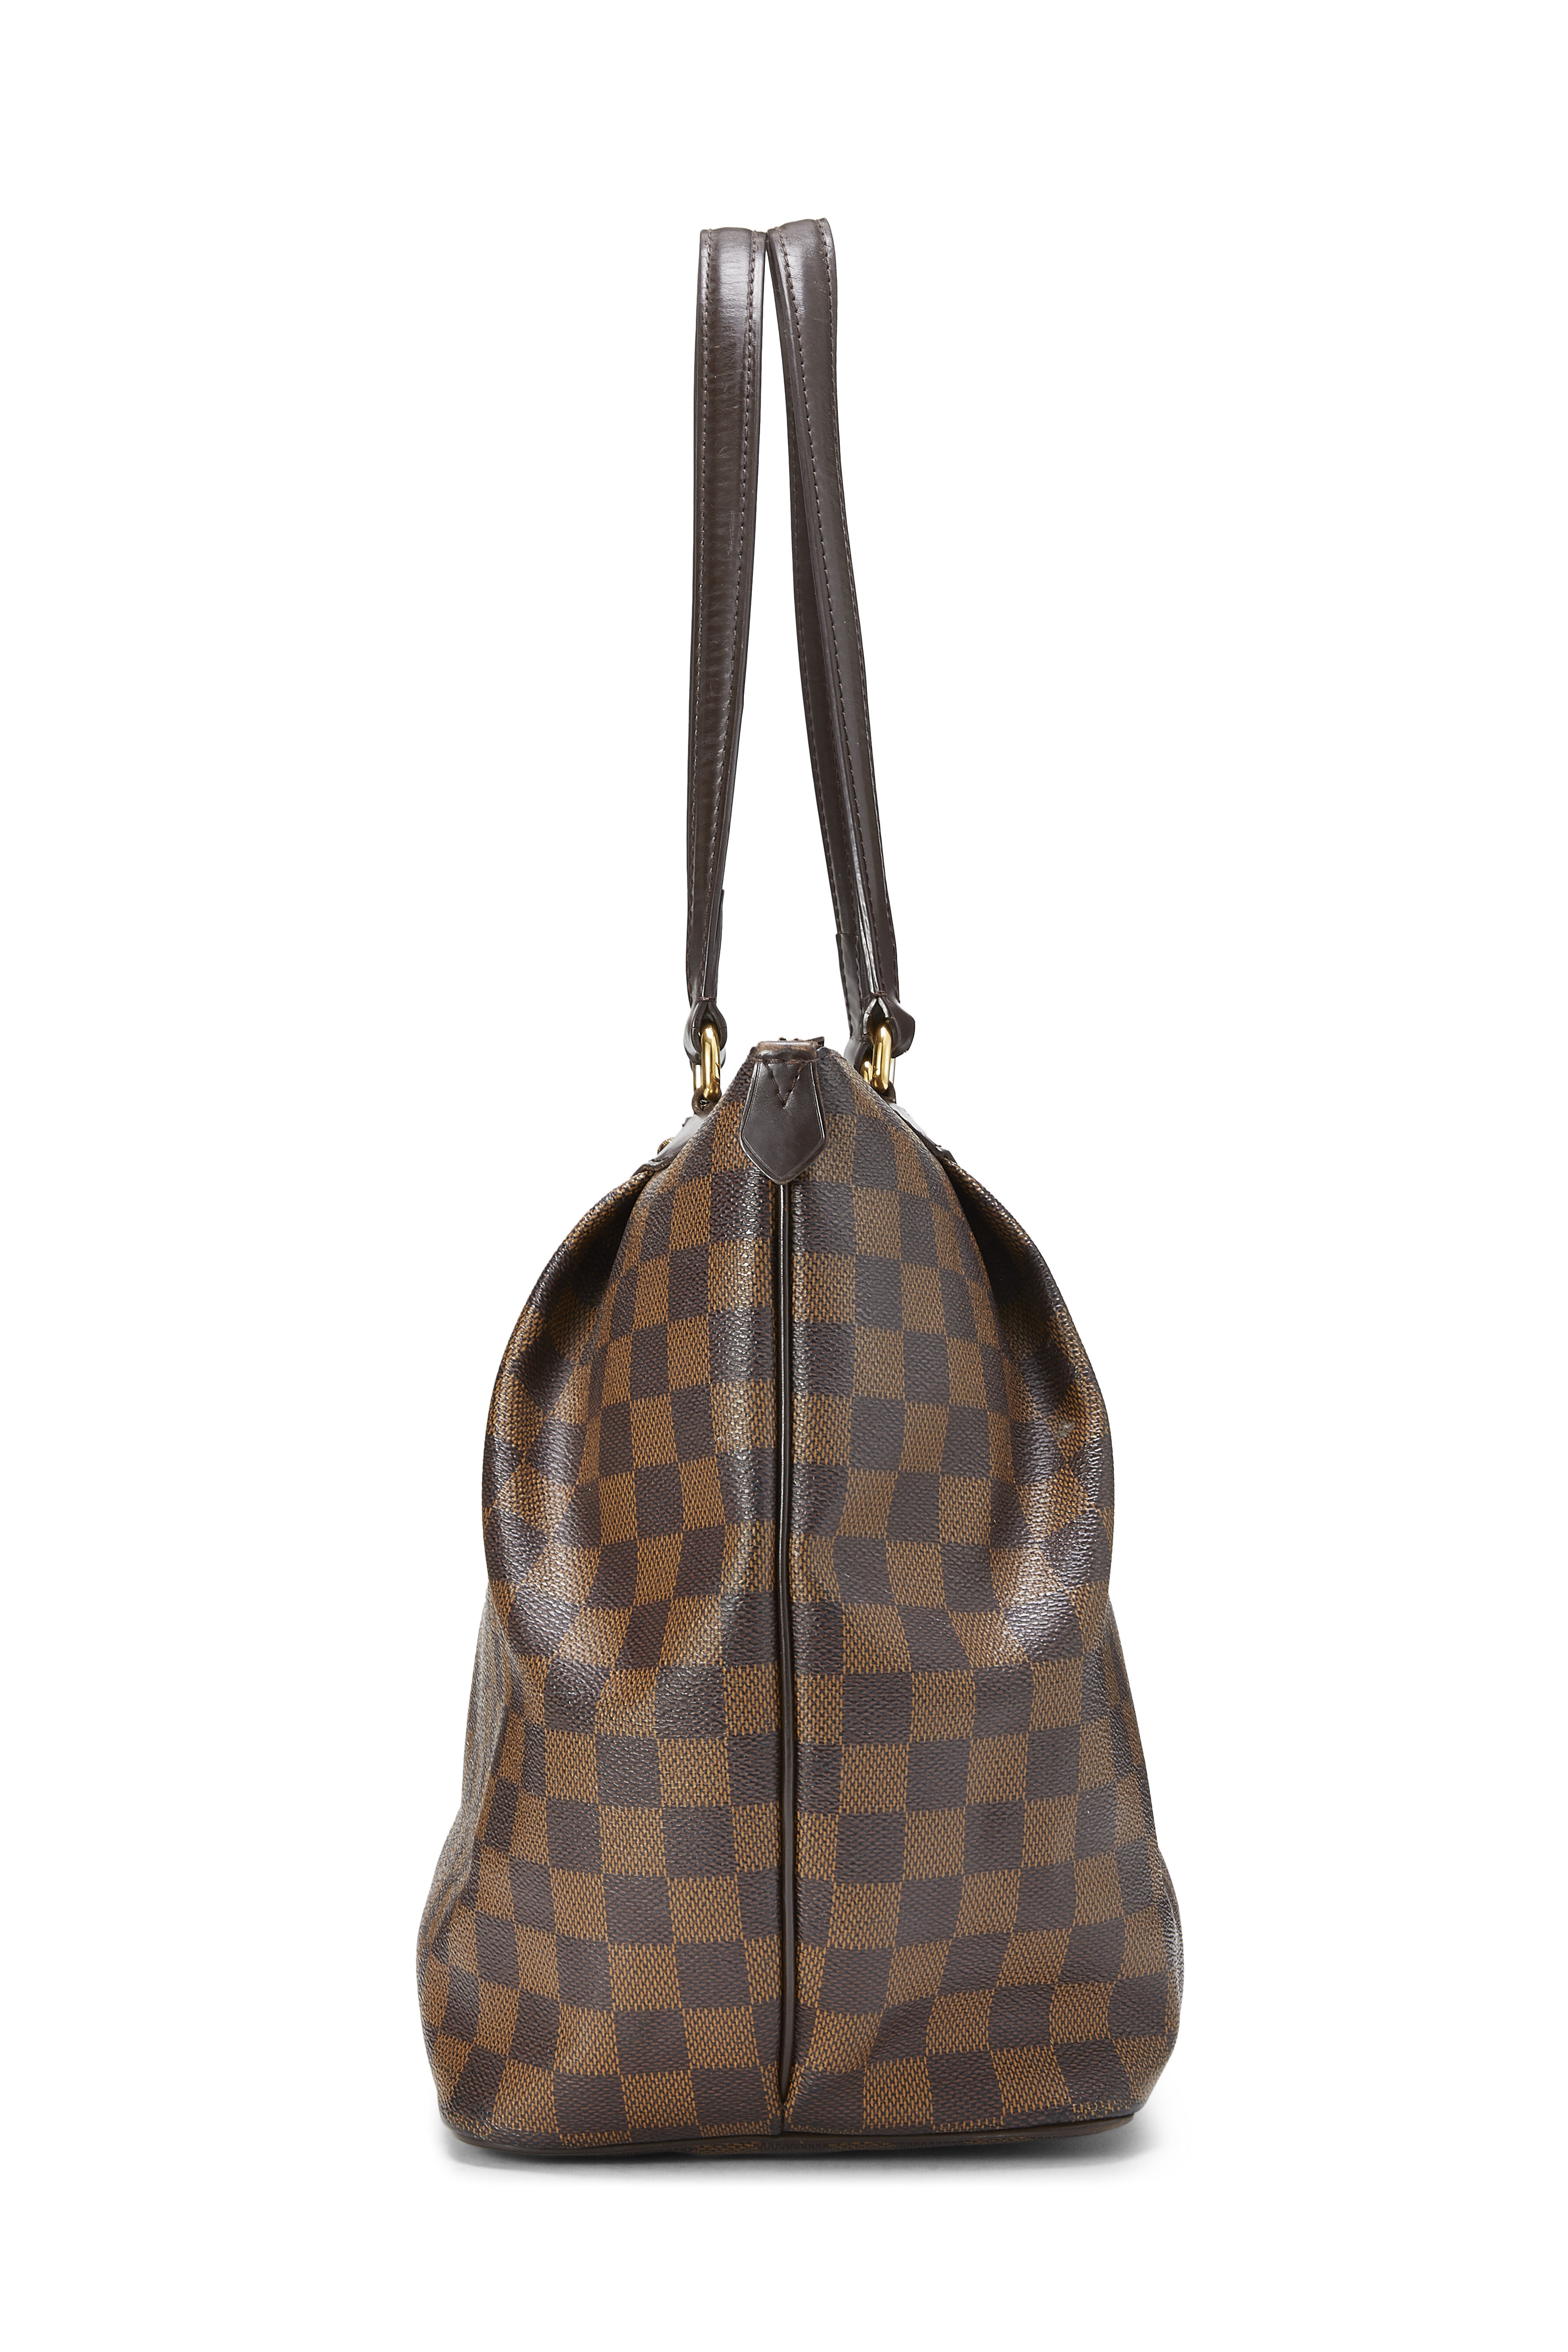 Louis Vuitton Damier Ebene Westminster - What Around Comes